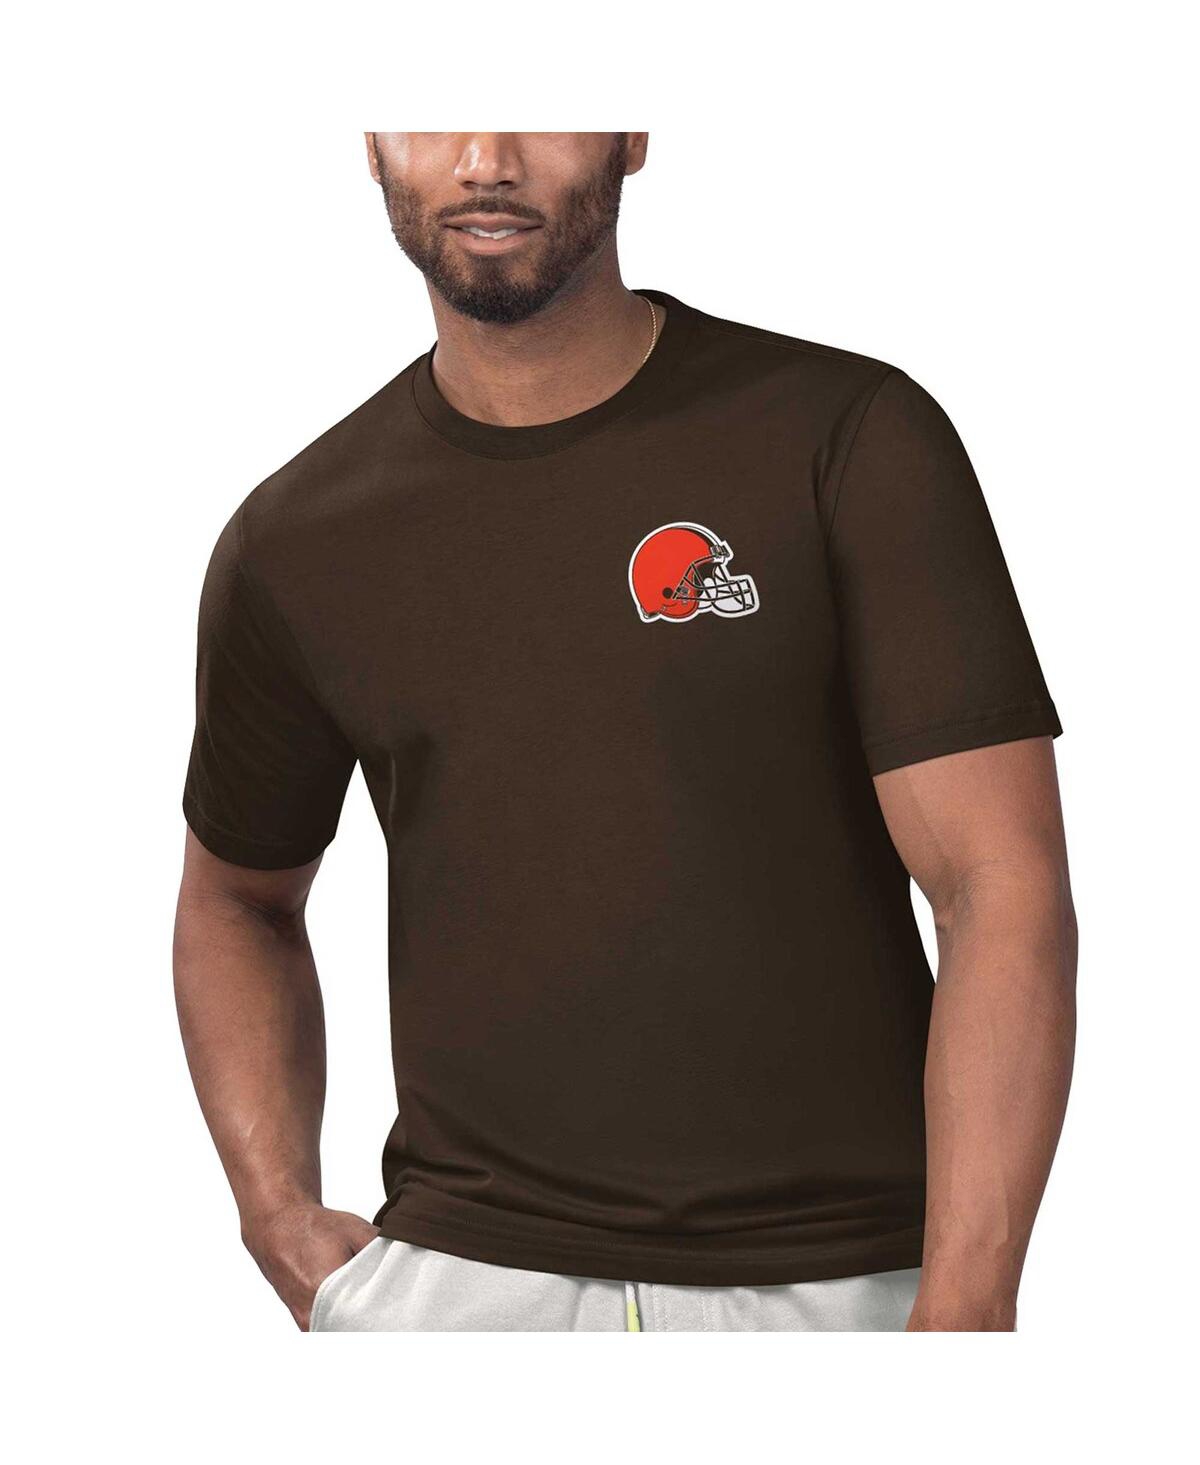 Men's Margaritaville Brown Cleveland Browns Licensed to Chill T-shirt - Brown